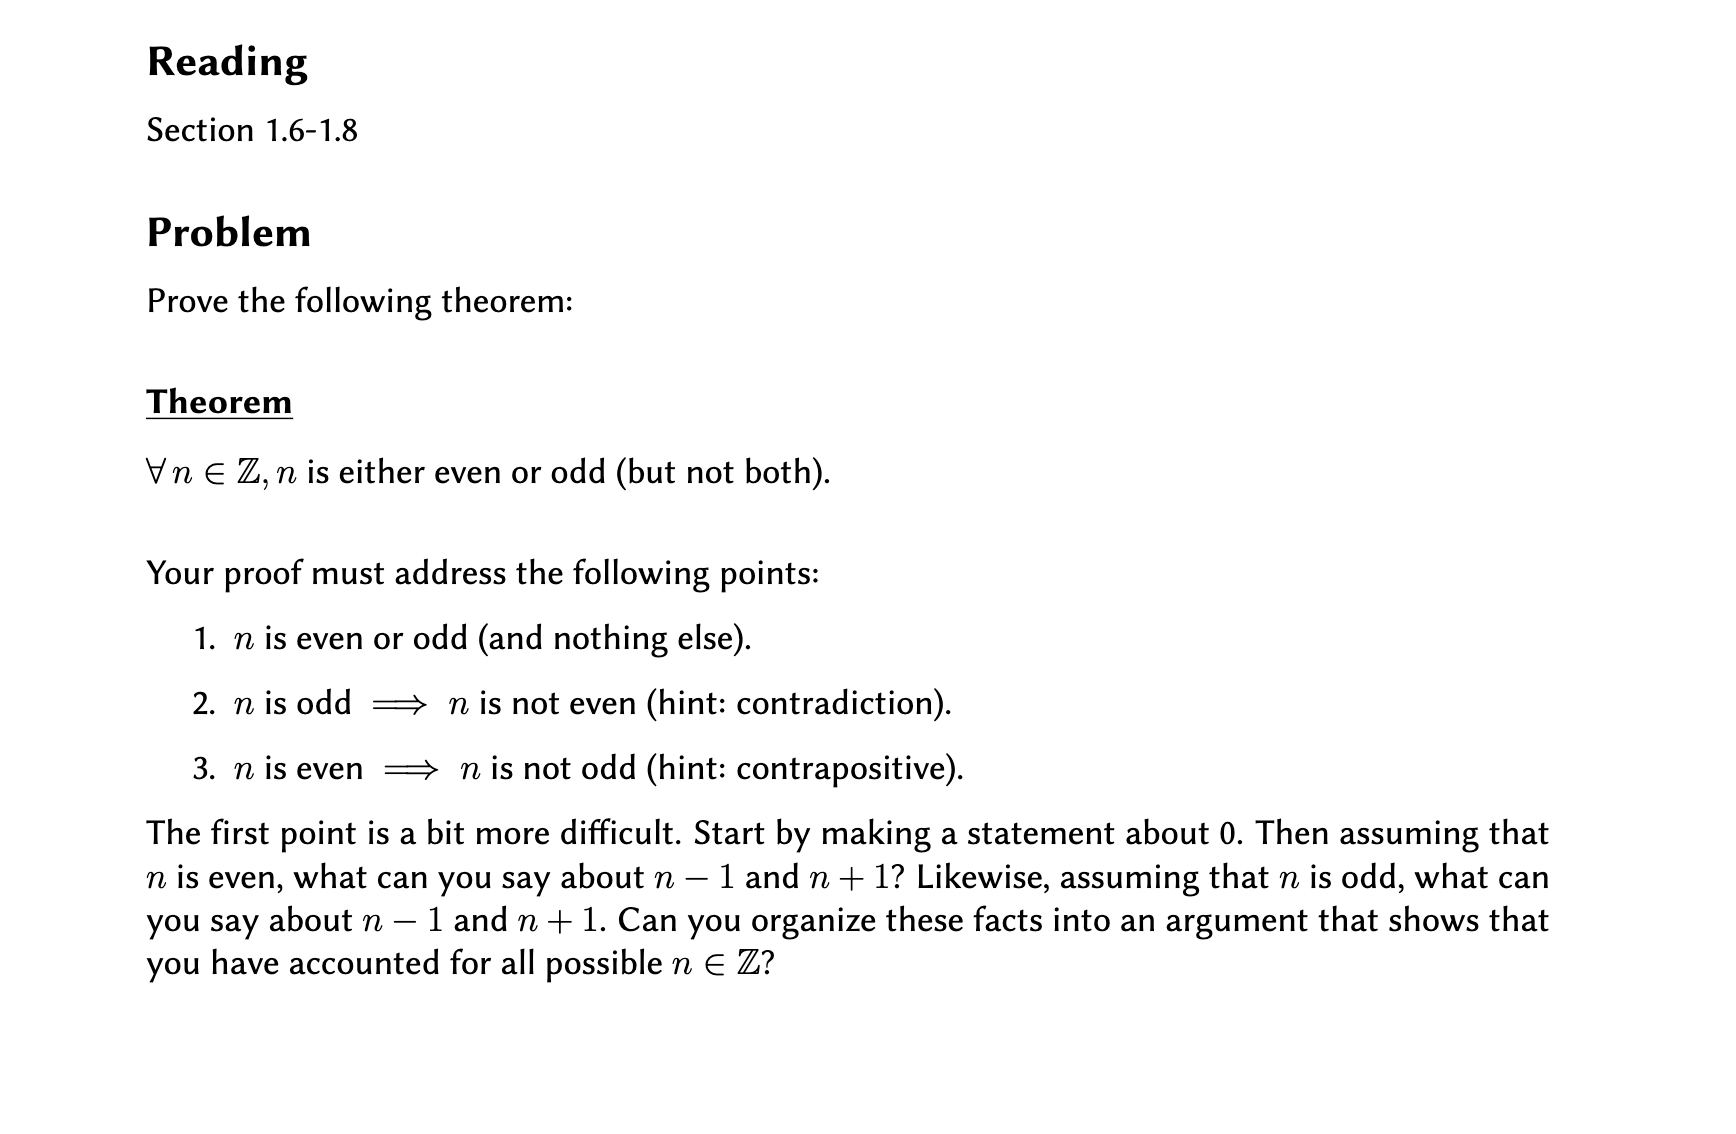 Reading
Section 1.6-1.8
Problem
Prove the following theorem:
Theorem
Vn E Z, n is either even or odd (but not both).
Your proof must address the following points:
1. n is even or odd (and nothing else).
2. n is odd =
n is not even (hint: contradiction).
3. n is even
→ n is not odd (hint: contrapositive).
The first point is a bit more difficult. Start by making a statement about 0. Then assuming that
n is even, what can you say about n – 1 and n + 1? Likewise, assuming that n is odd, what can
- 1 and n + 1. Can you organize these facts into an argument that shows that
you say about n
you have accounted for all possible n E Z?
